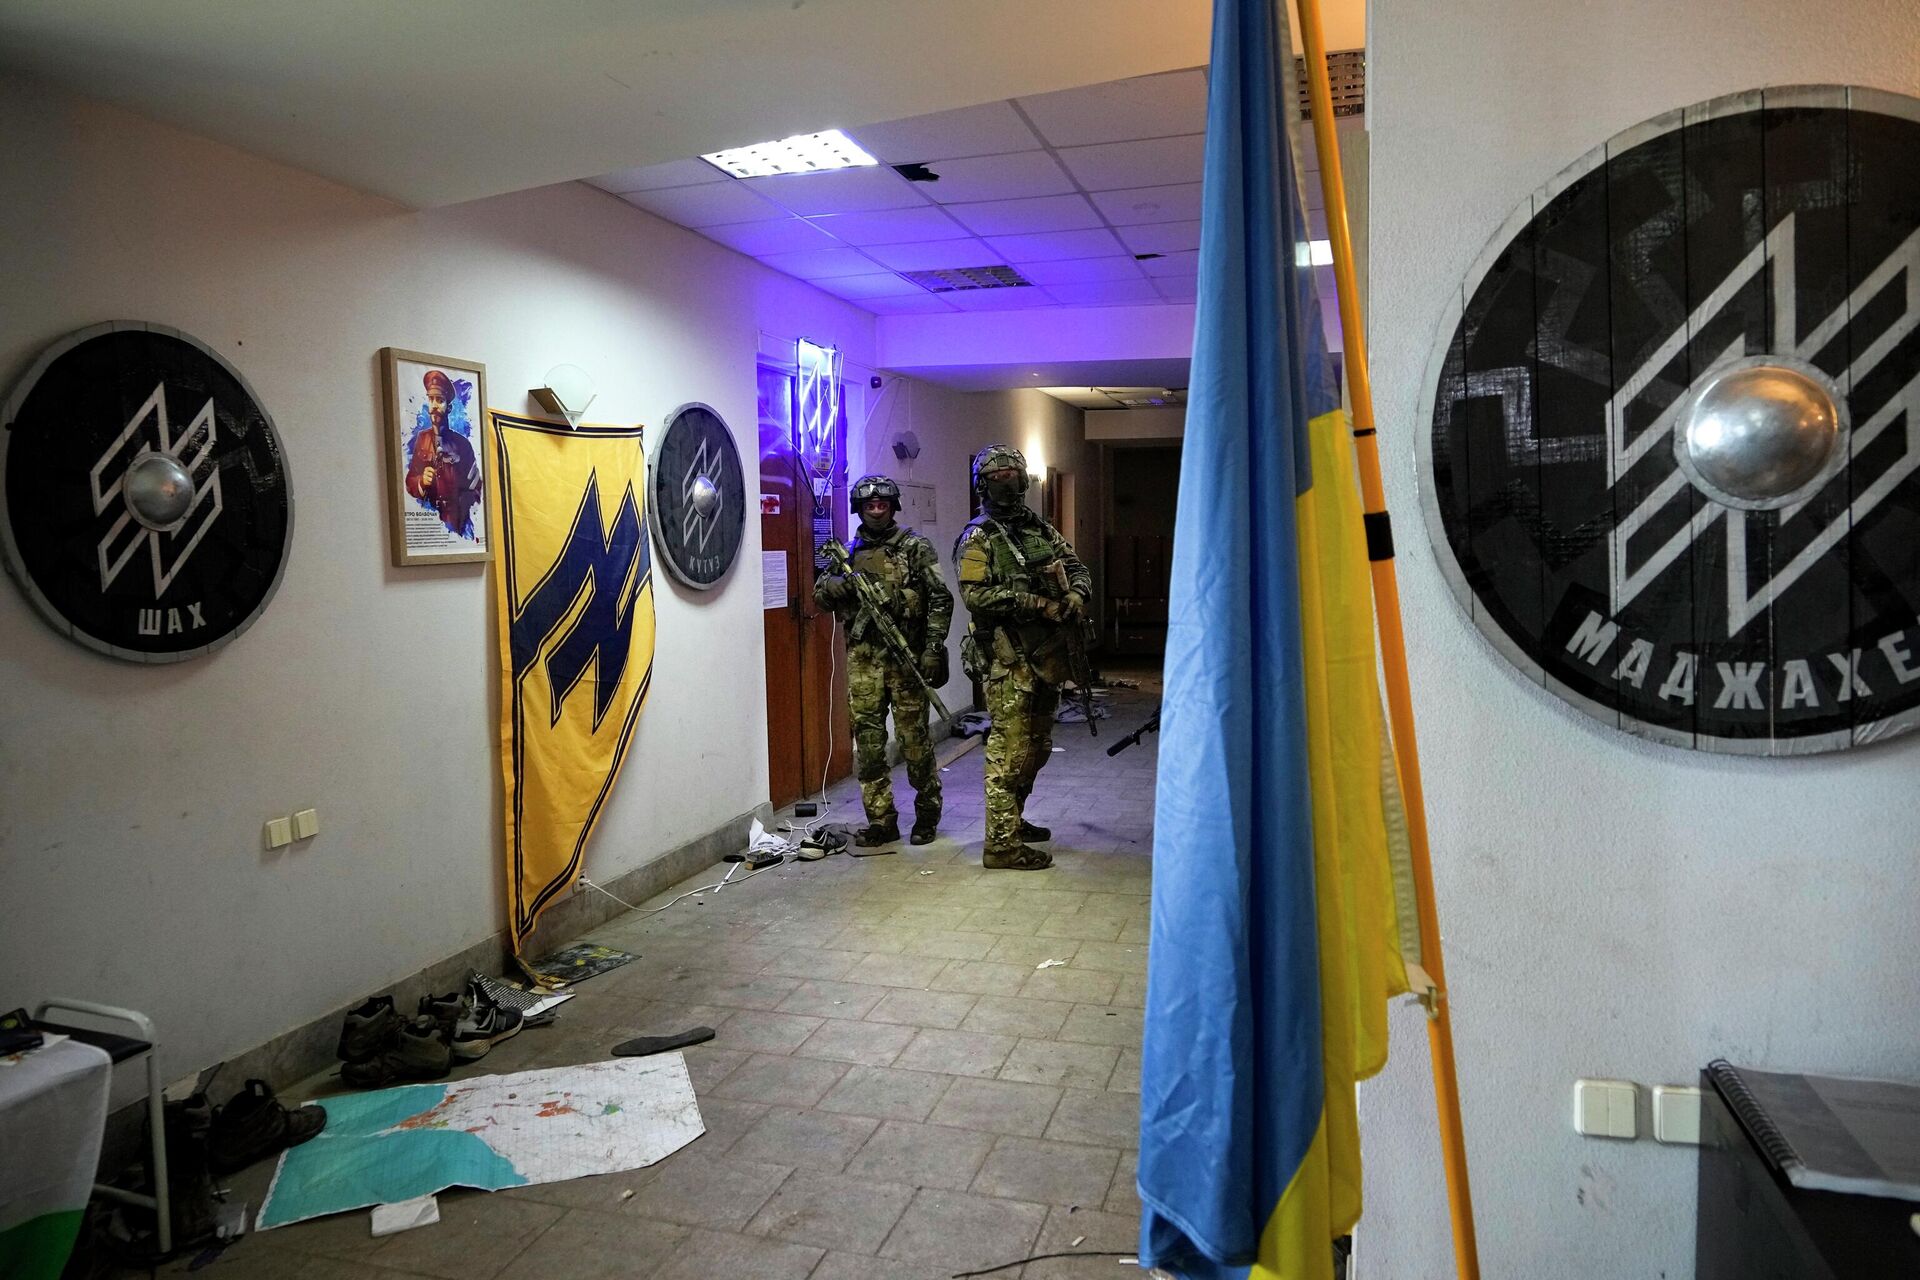 Russian soldiers walk inside the Ukraine's Azov Regiment base adorned with the unit's emblems in Yuriivka resort settlement on the coast of Azov Sea not far from Mariupol, in territory under the government of the Donetsk People's Republic, eastern Ukraine, Wednesday, May 18, 2022 - Sputnik International, 1920, 24.05.2022